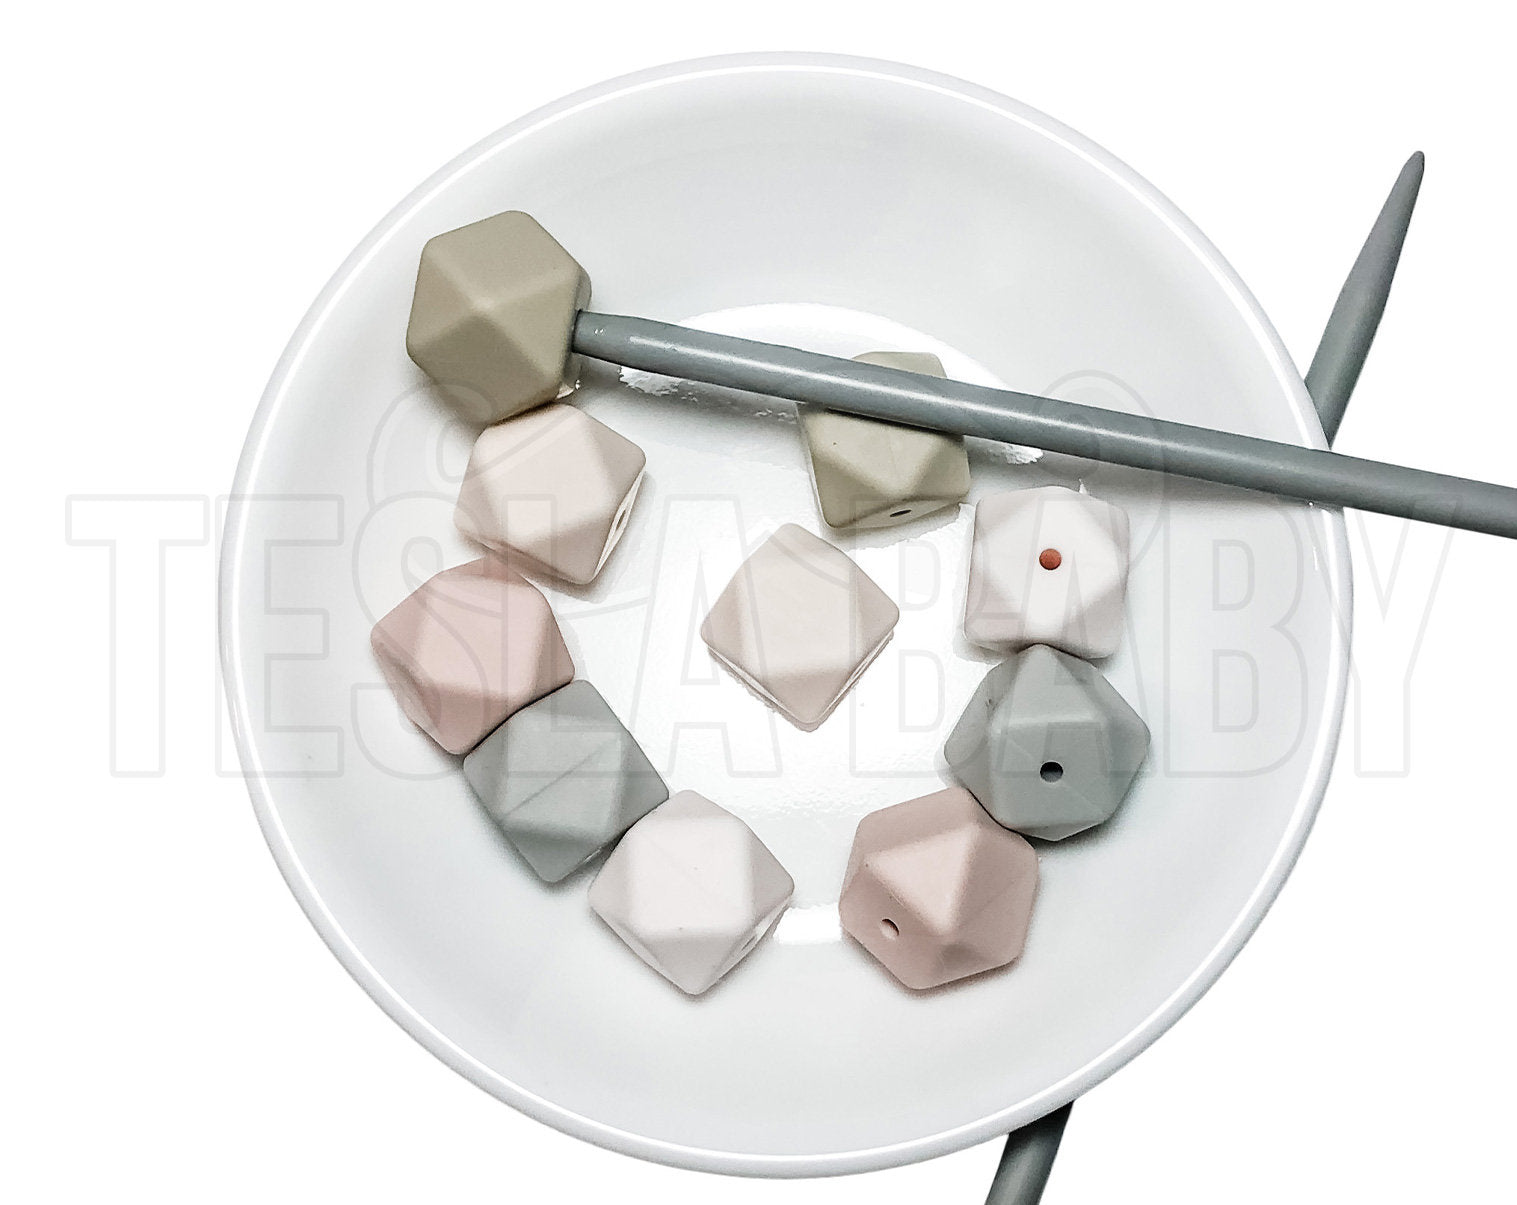 Knitting Needle Stoppers - Neutrals - Beader Caps - Beader Tips - Back Stoppers - Point Protectors - End Stoppers - Stitch Holder